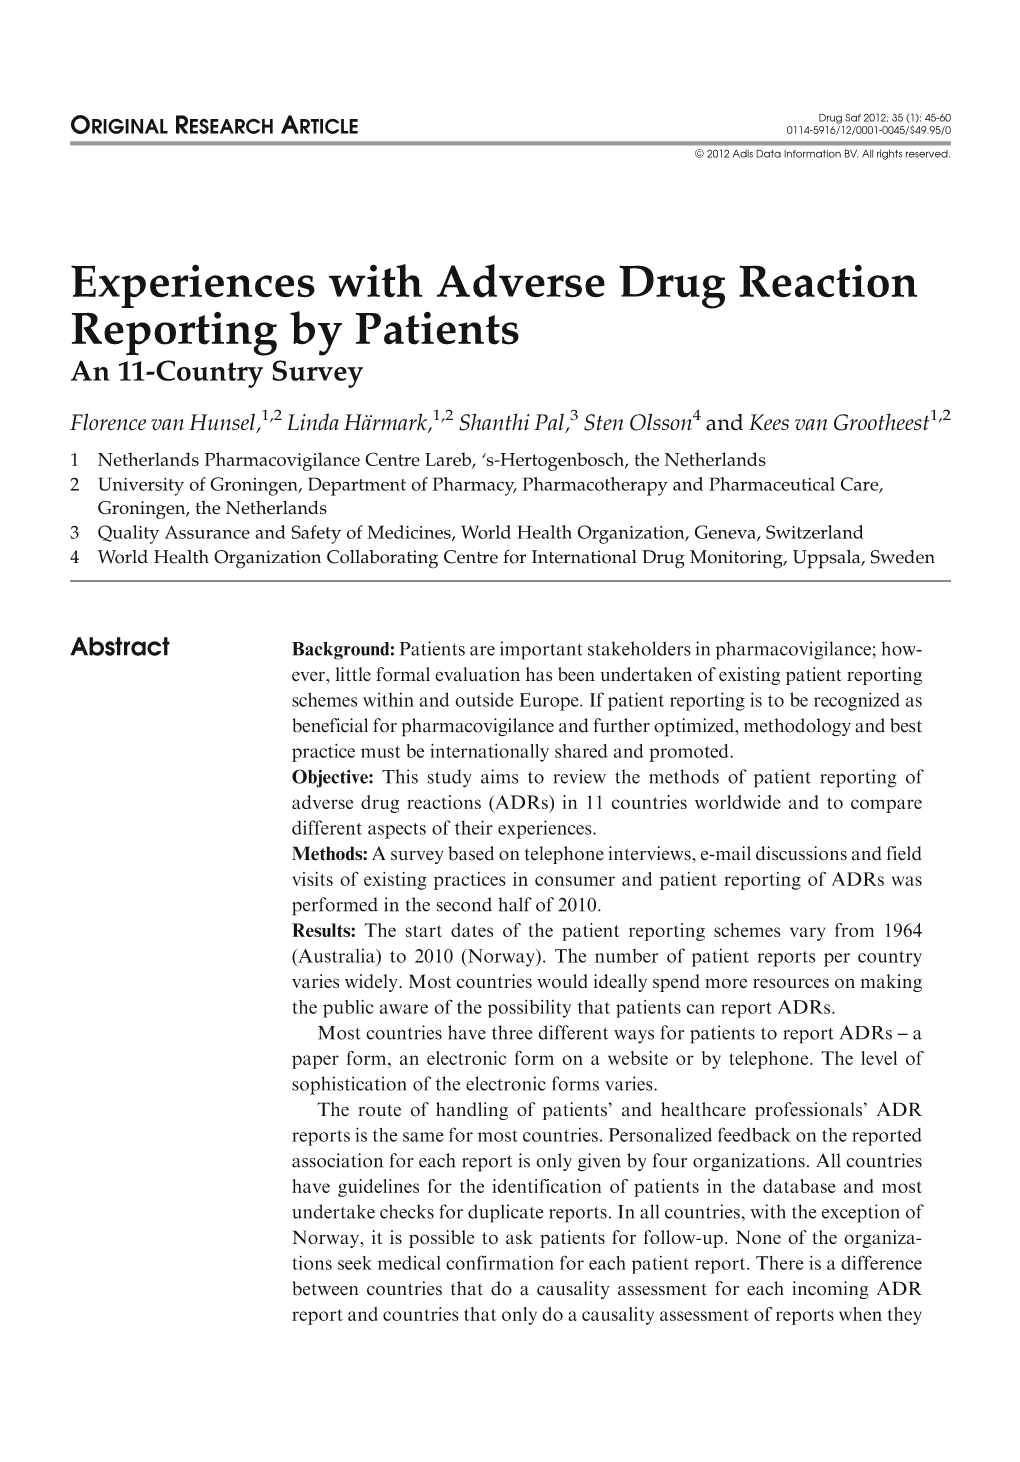 Experiences with Adverse Drug Reaction Reporting by Patients an 11-Country Survey